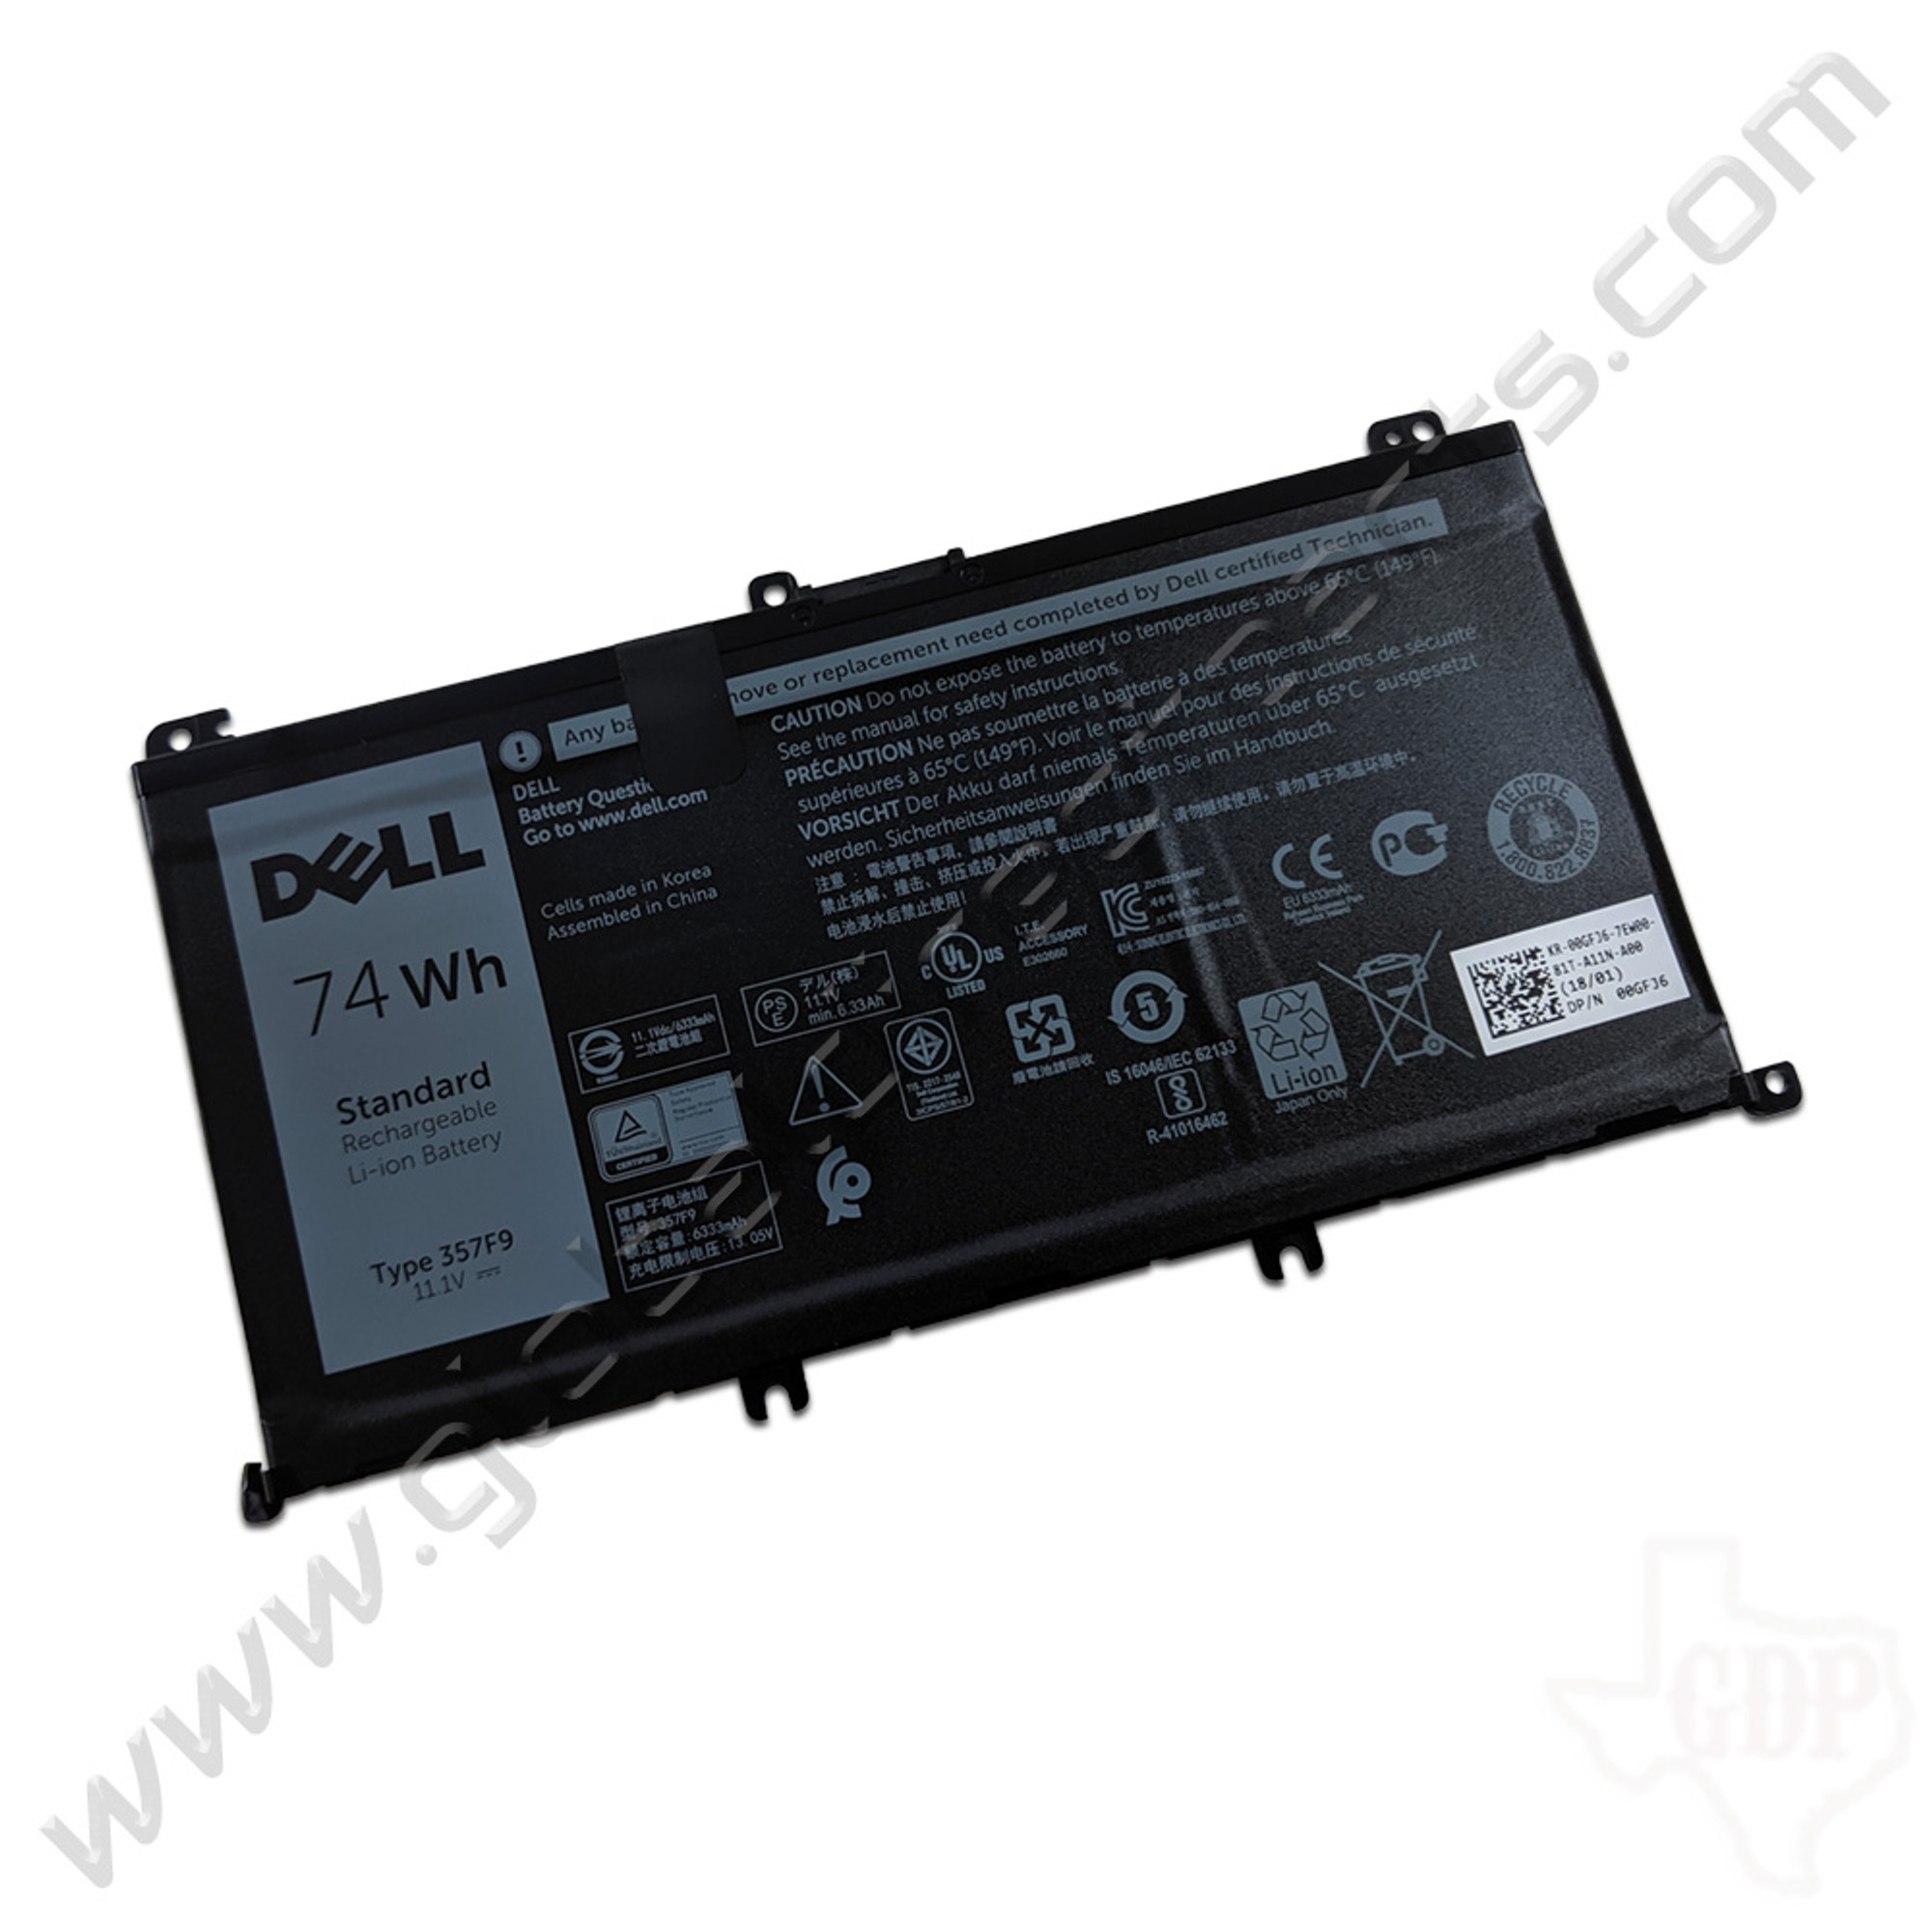 Oem Dell Inspiron 7000 Series Battery 357f9 Global Direct Parts